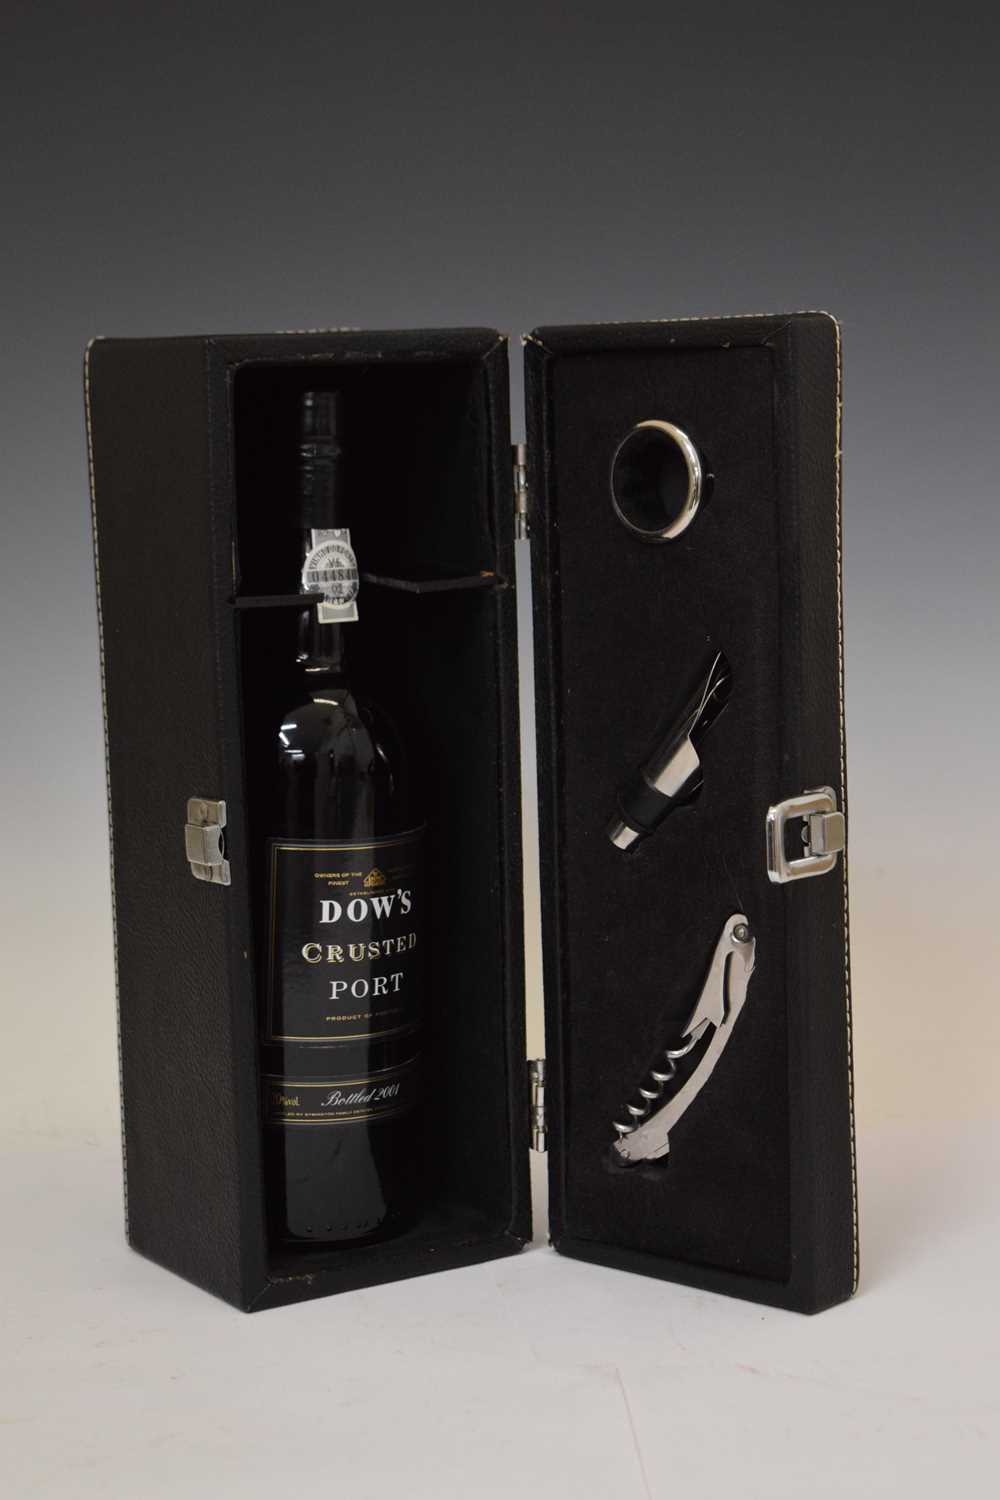 Dow’s crusted port, bottled 2001, 1 bottle, in presentation box - Image 5 of 6